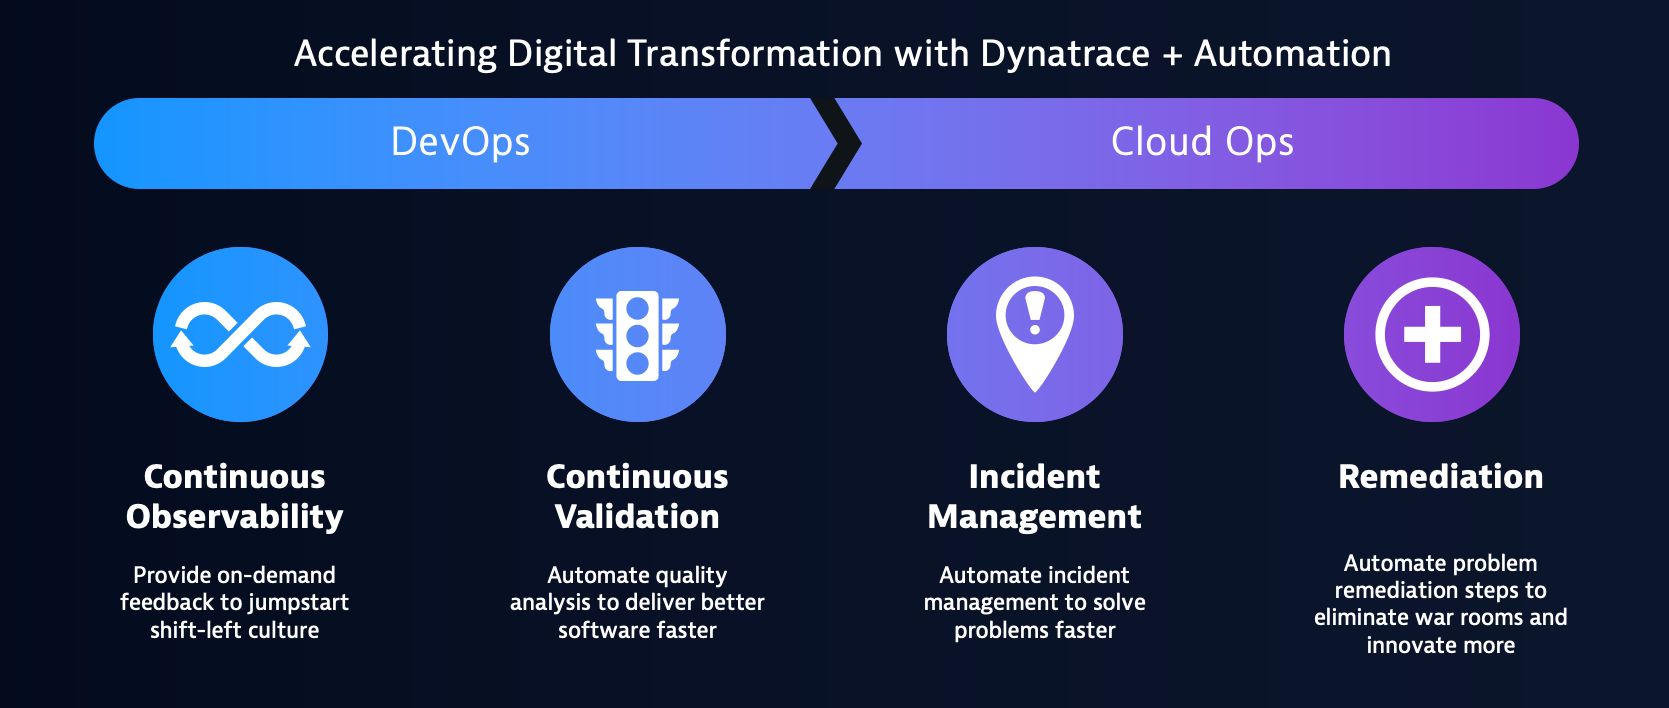 DevOps automation and Cloud Ops automation use cases